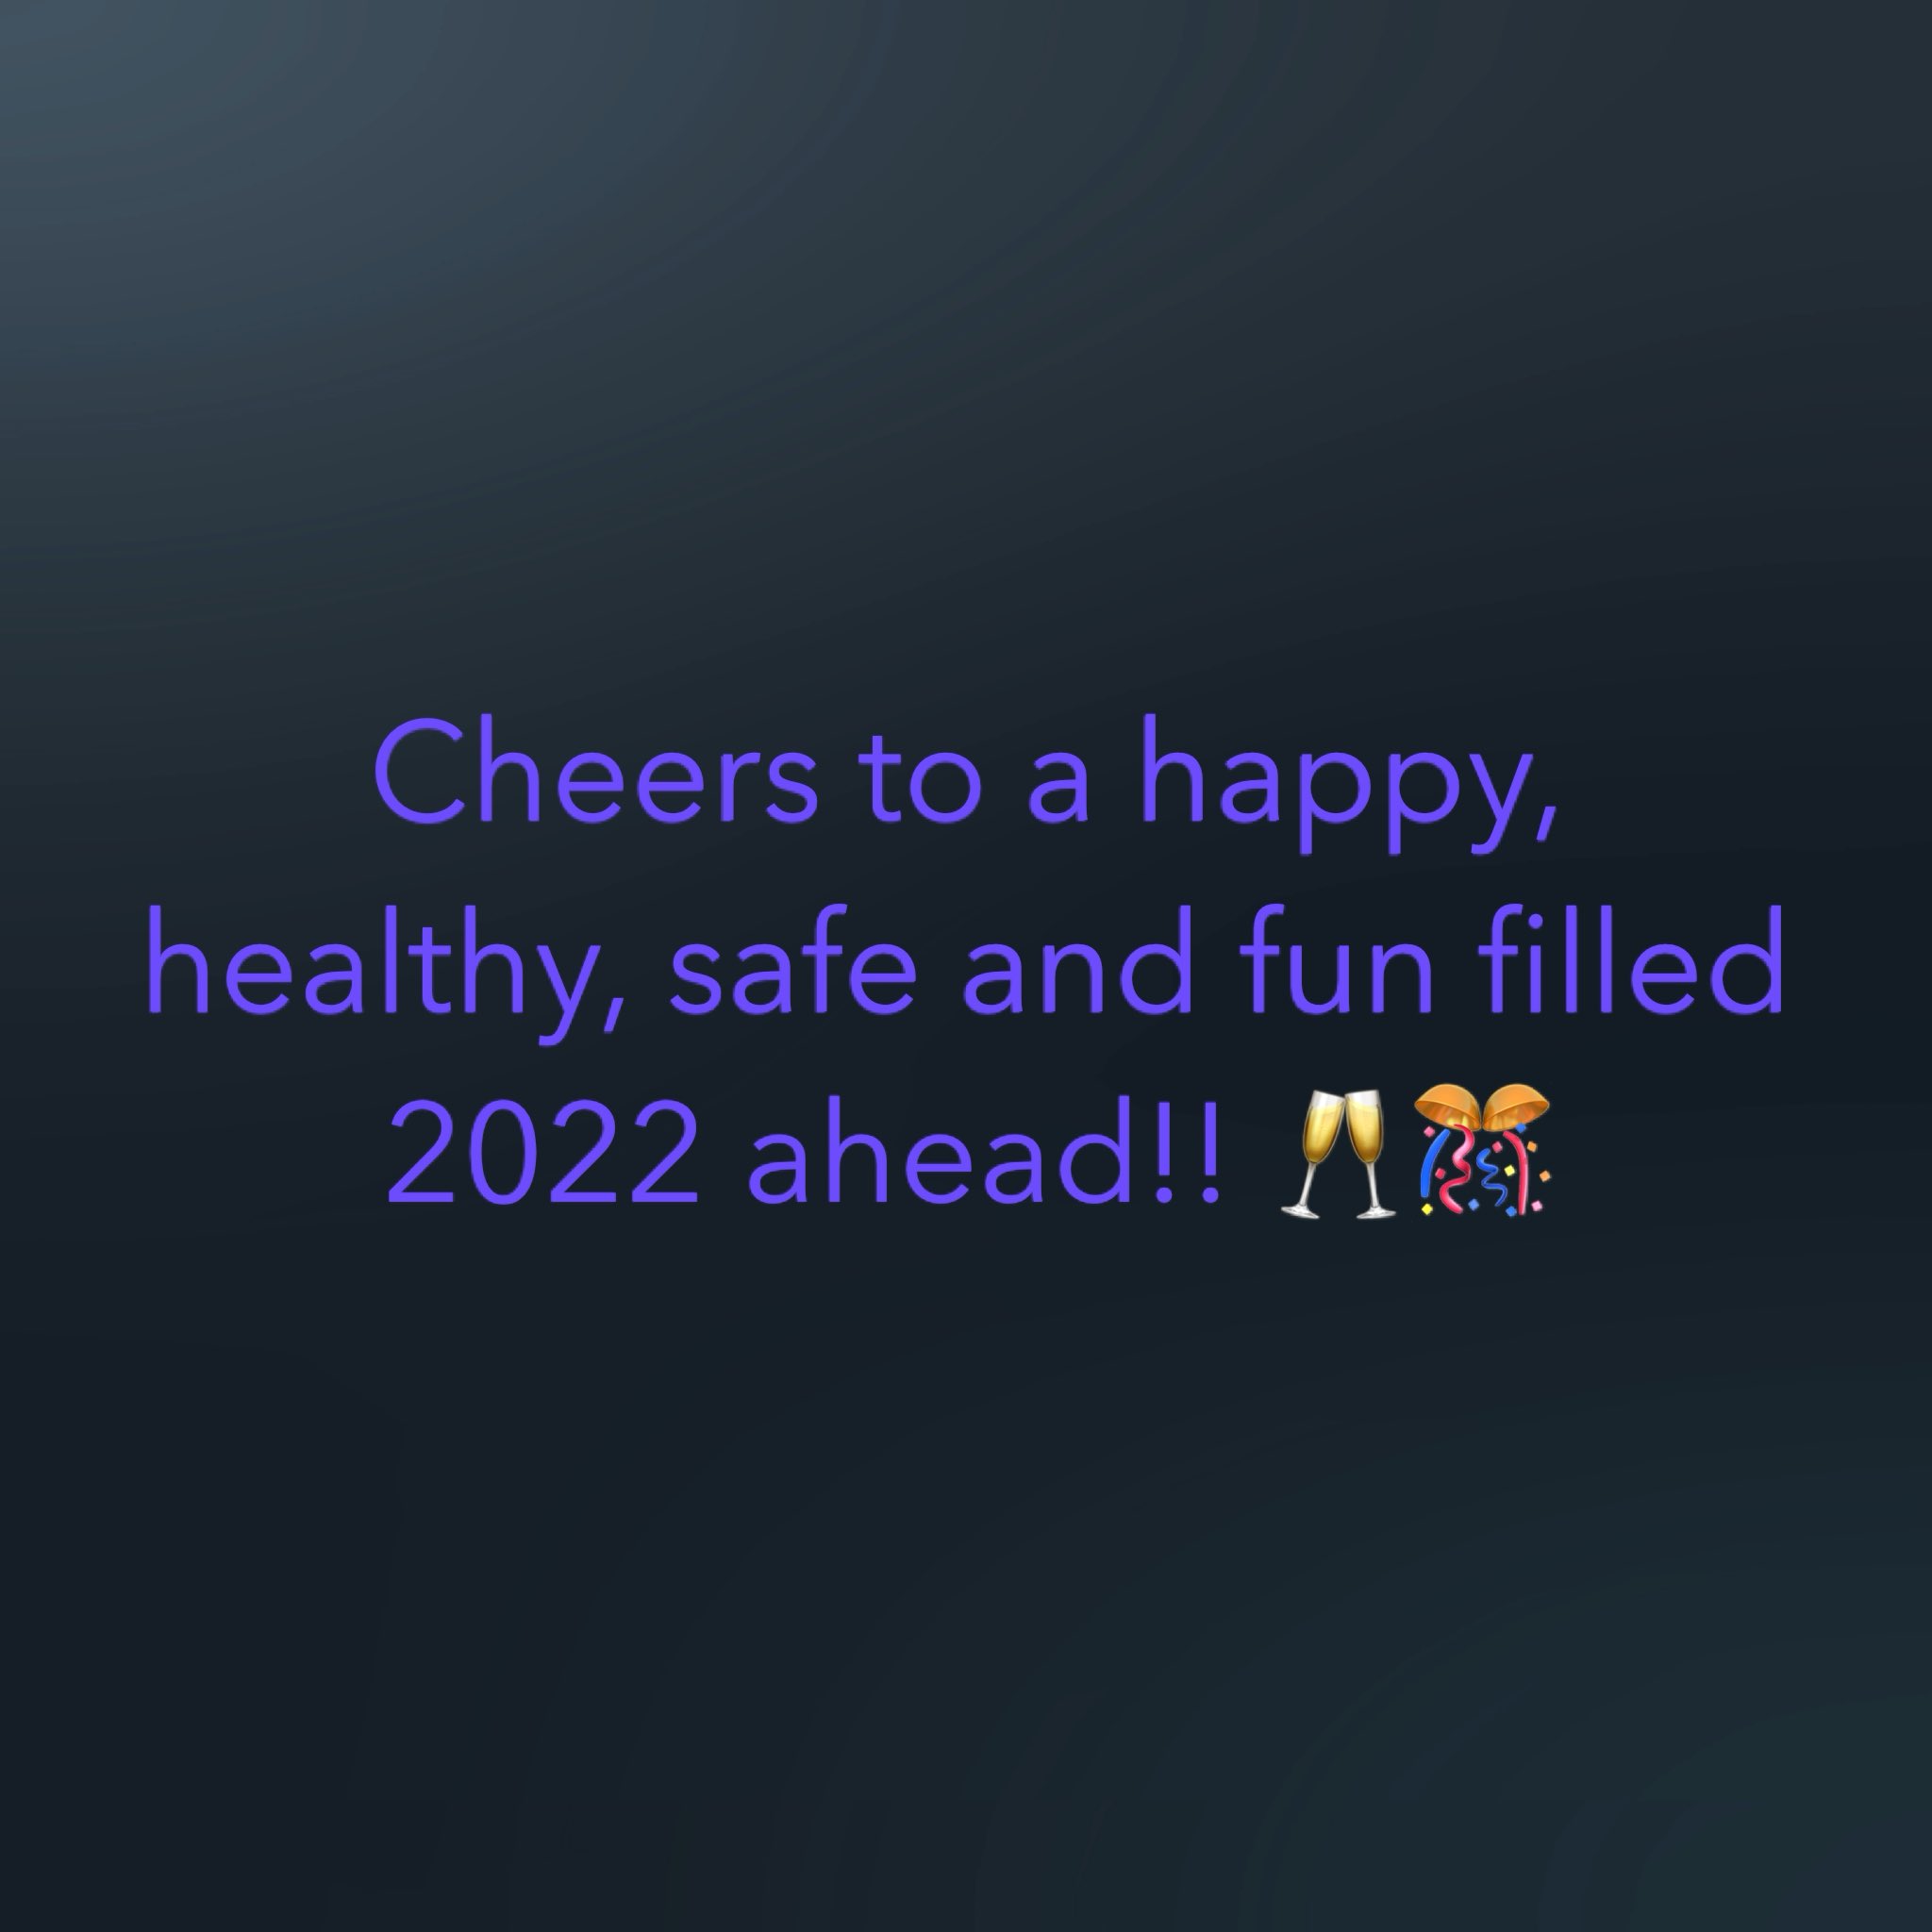 Cheers to a happy, healthy, safe and fun filled 2022 ahead!! 🥂🎊